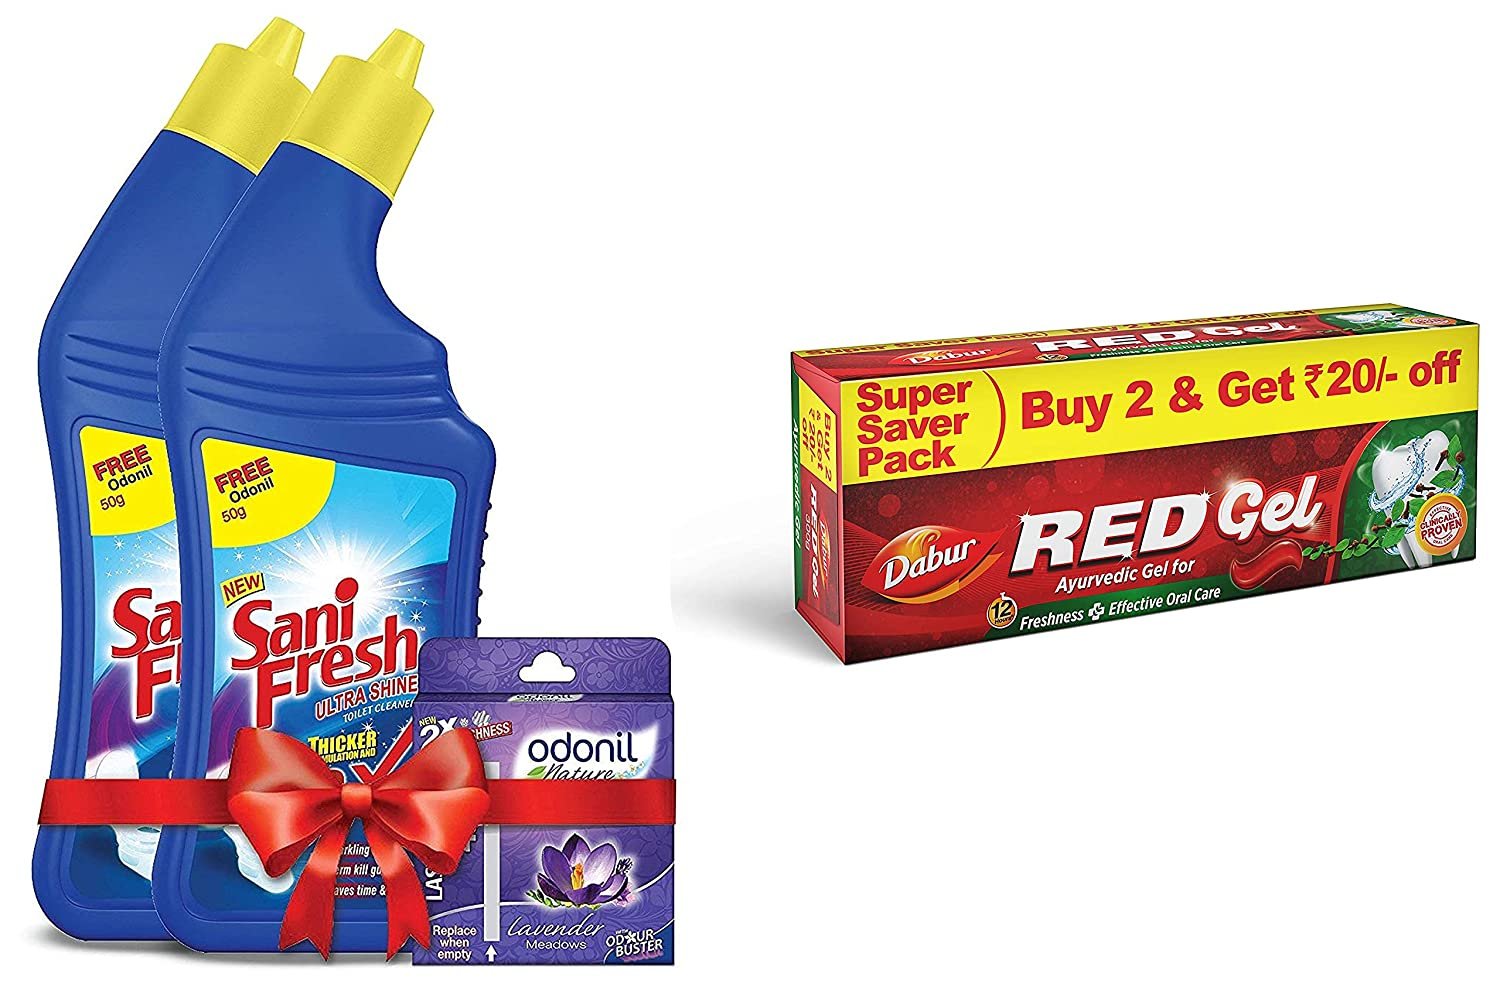 Dabur Red Gel :Ayurvedic Gel for Freshness and Effective Oral Care -150gm (Pack of 2) and Sanifresh Ultrashine 1L, Toilet Cleaner-1.5X Extra Clean with Odonil Room Freshner Blocks 50 g Free